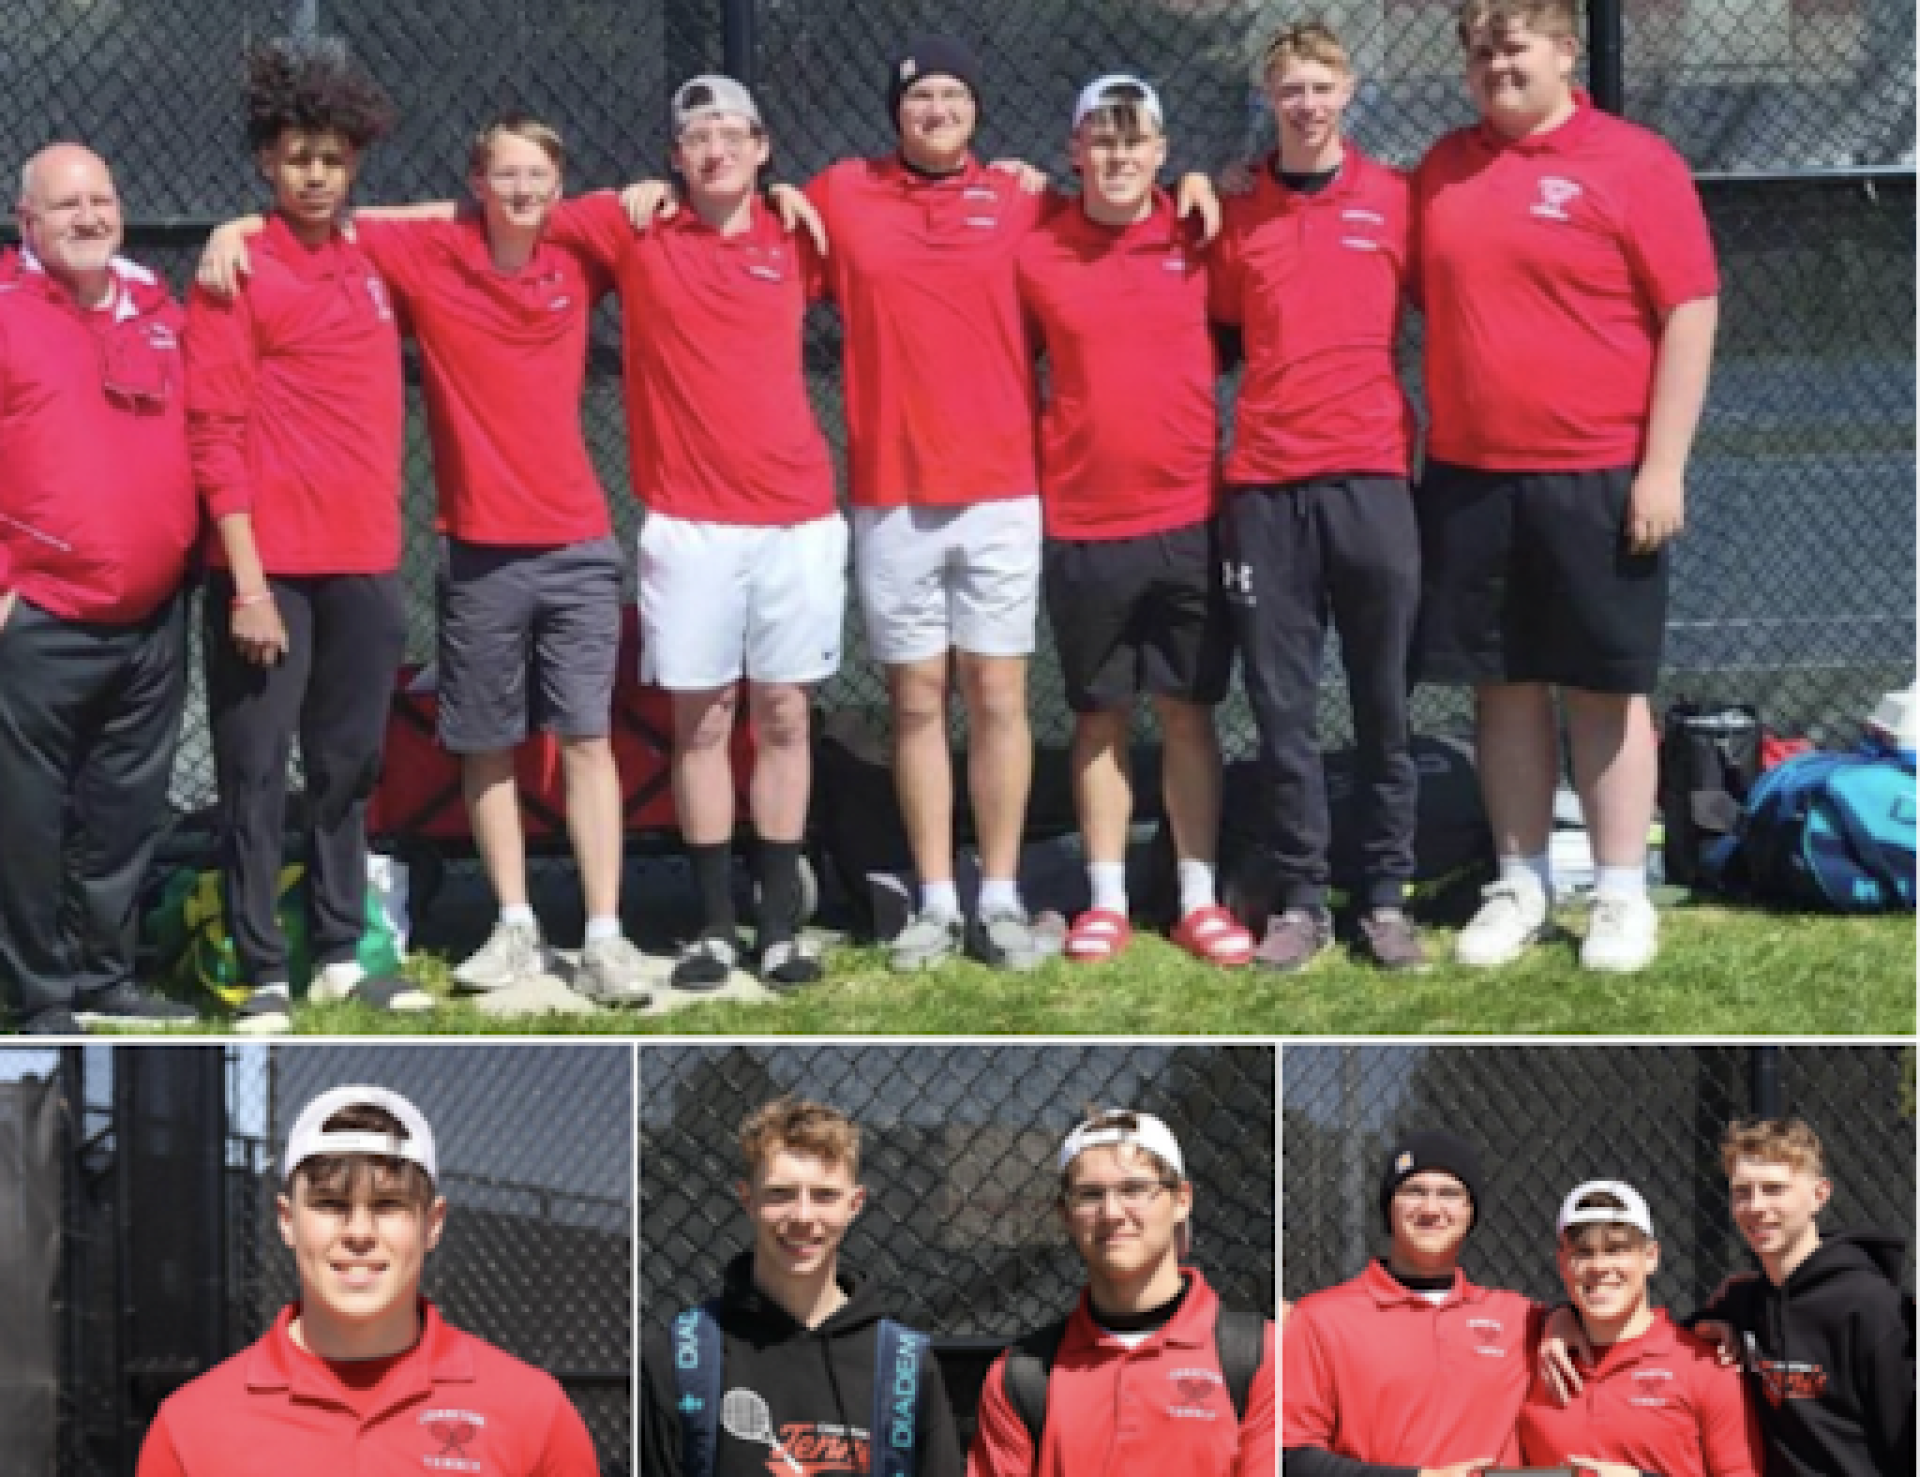 Chariton CSD Tennis Team collage after winning conference champions.